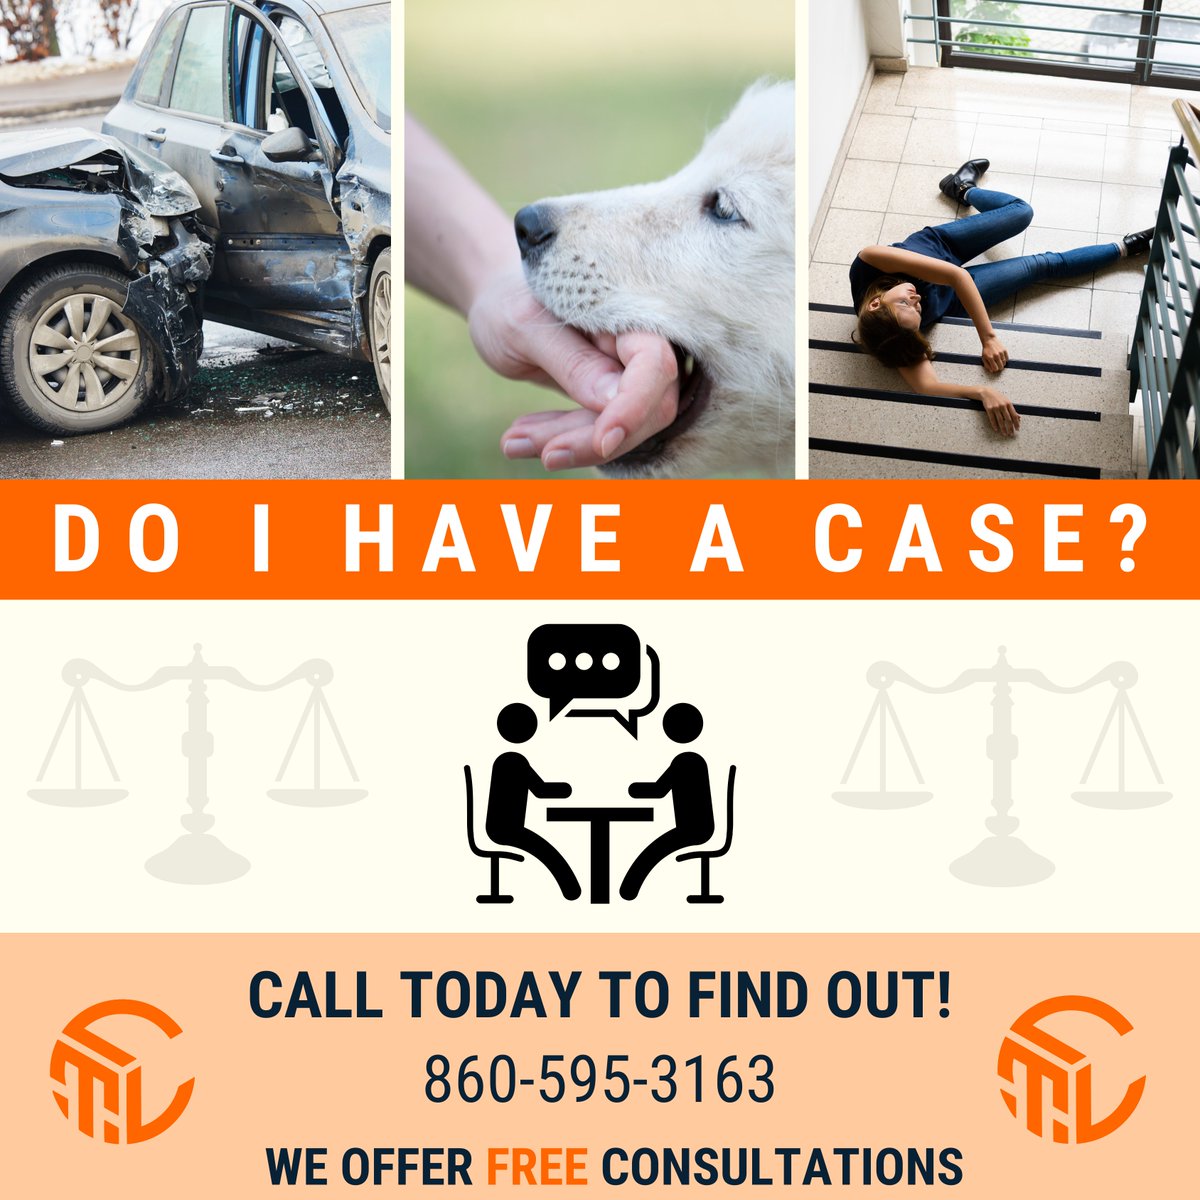 Want to know if you have a case? Give us a call - it's FREE! 
860-595-3163 !! If we can't help you, we'll point you in the RIGHT direction of someone who can! Give us a call, we'll be waiting!

...
#lawyerthelawyer #connecticutlawyer #connecticutattorney #ctlawyer #ctattorney